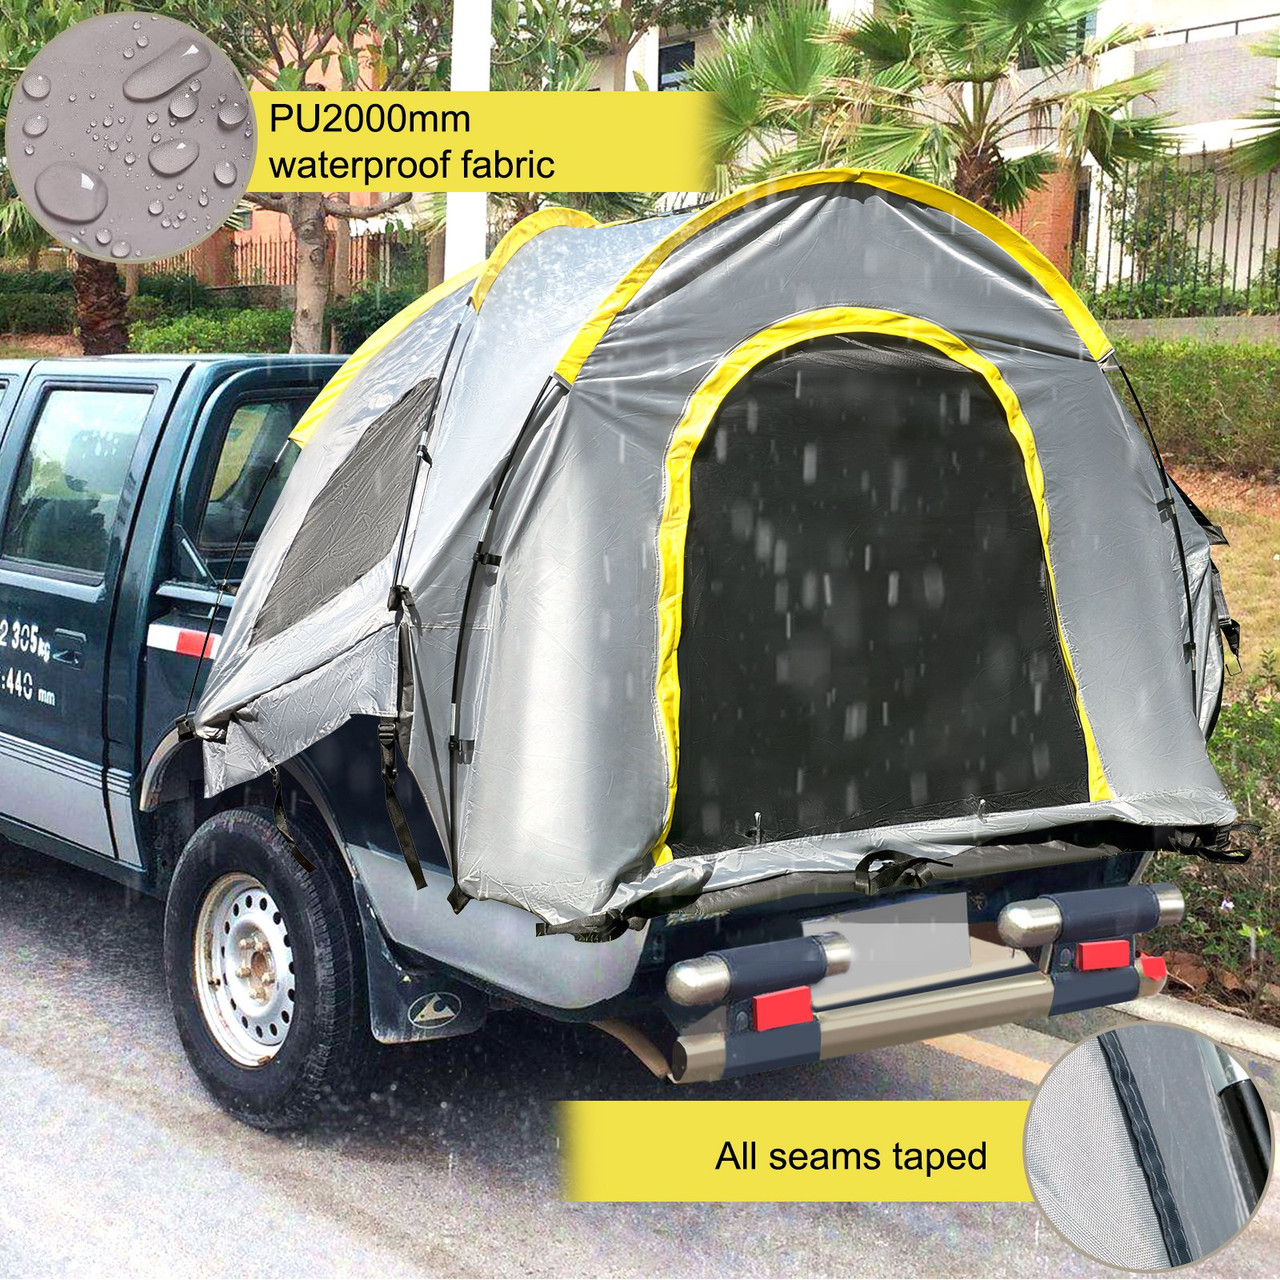 Truck Tent 6' Tall Bed Truck Bed Tent, Pickup Tent for Mid Size Truck, Waterproof Truck Camper, 2-Person Sleeping Capacity, 2 Mesh Windows, Easy to Setup Truck Tents for Camping, Hiking